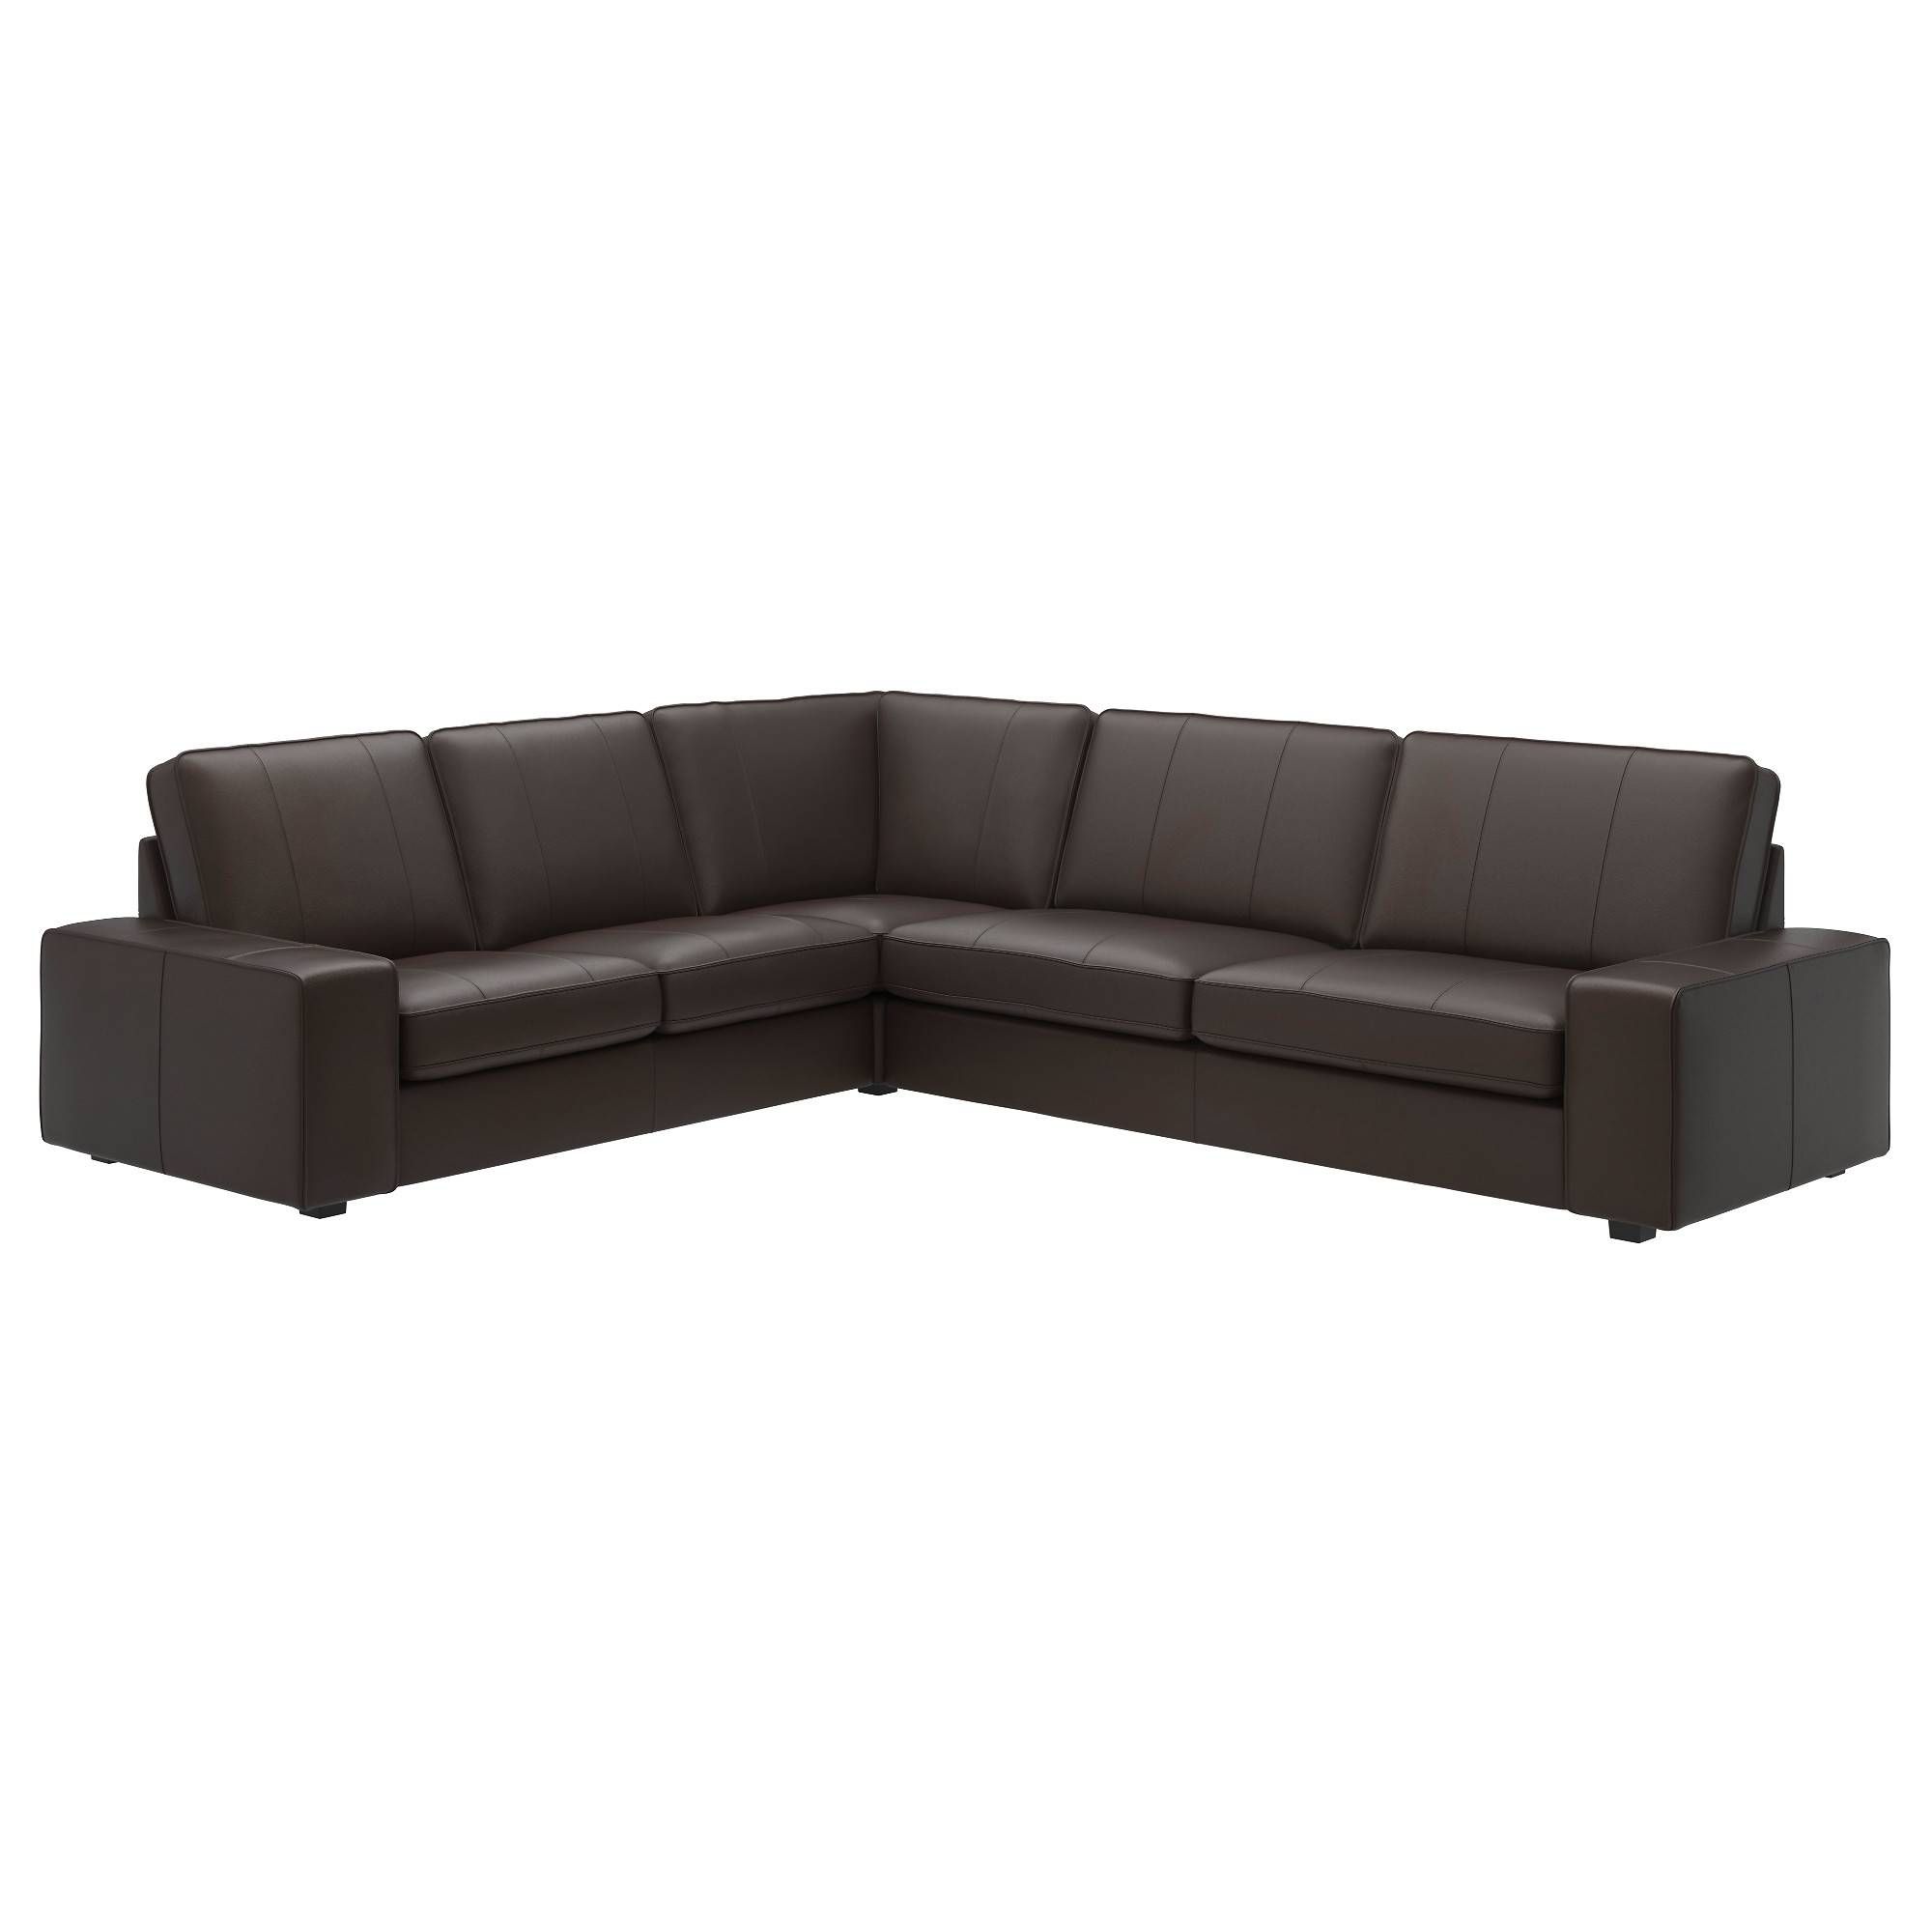 Leather/faux Leather Sectional Sofas – Ikea With Black Leather Corner Sofas (View 14 of 15)